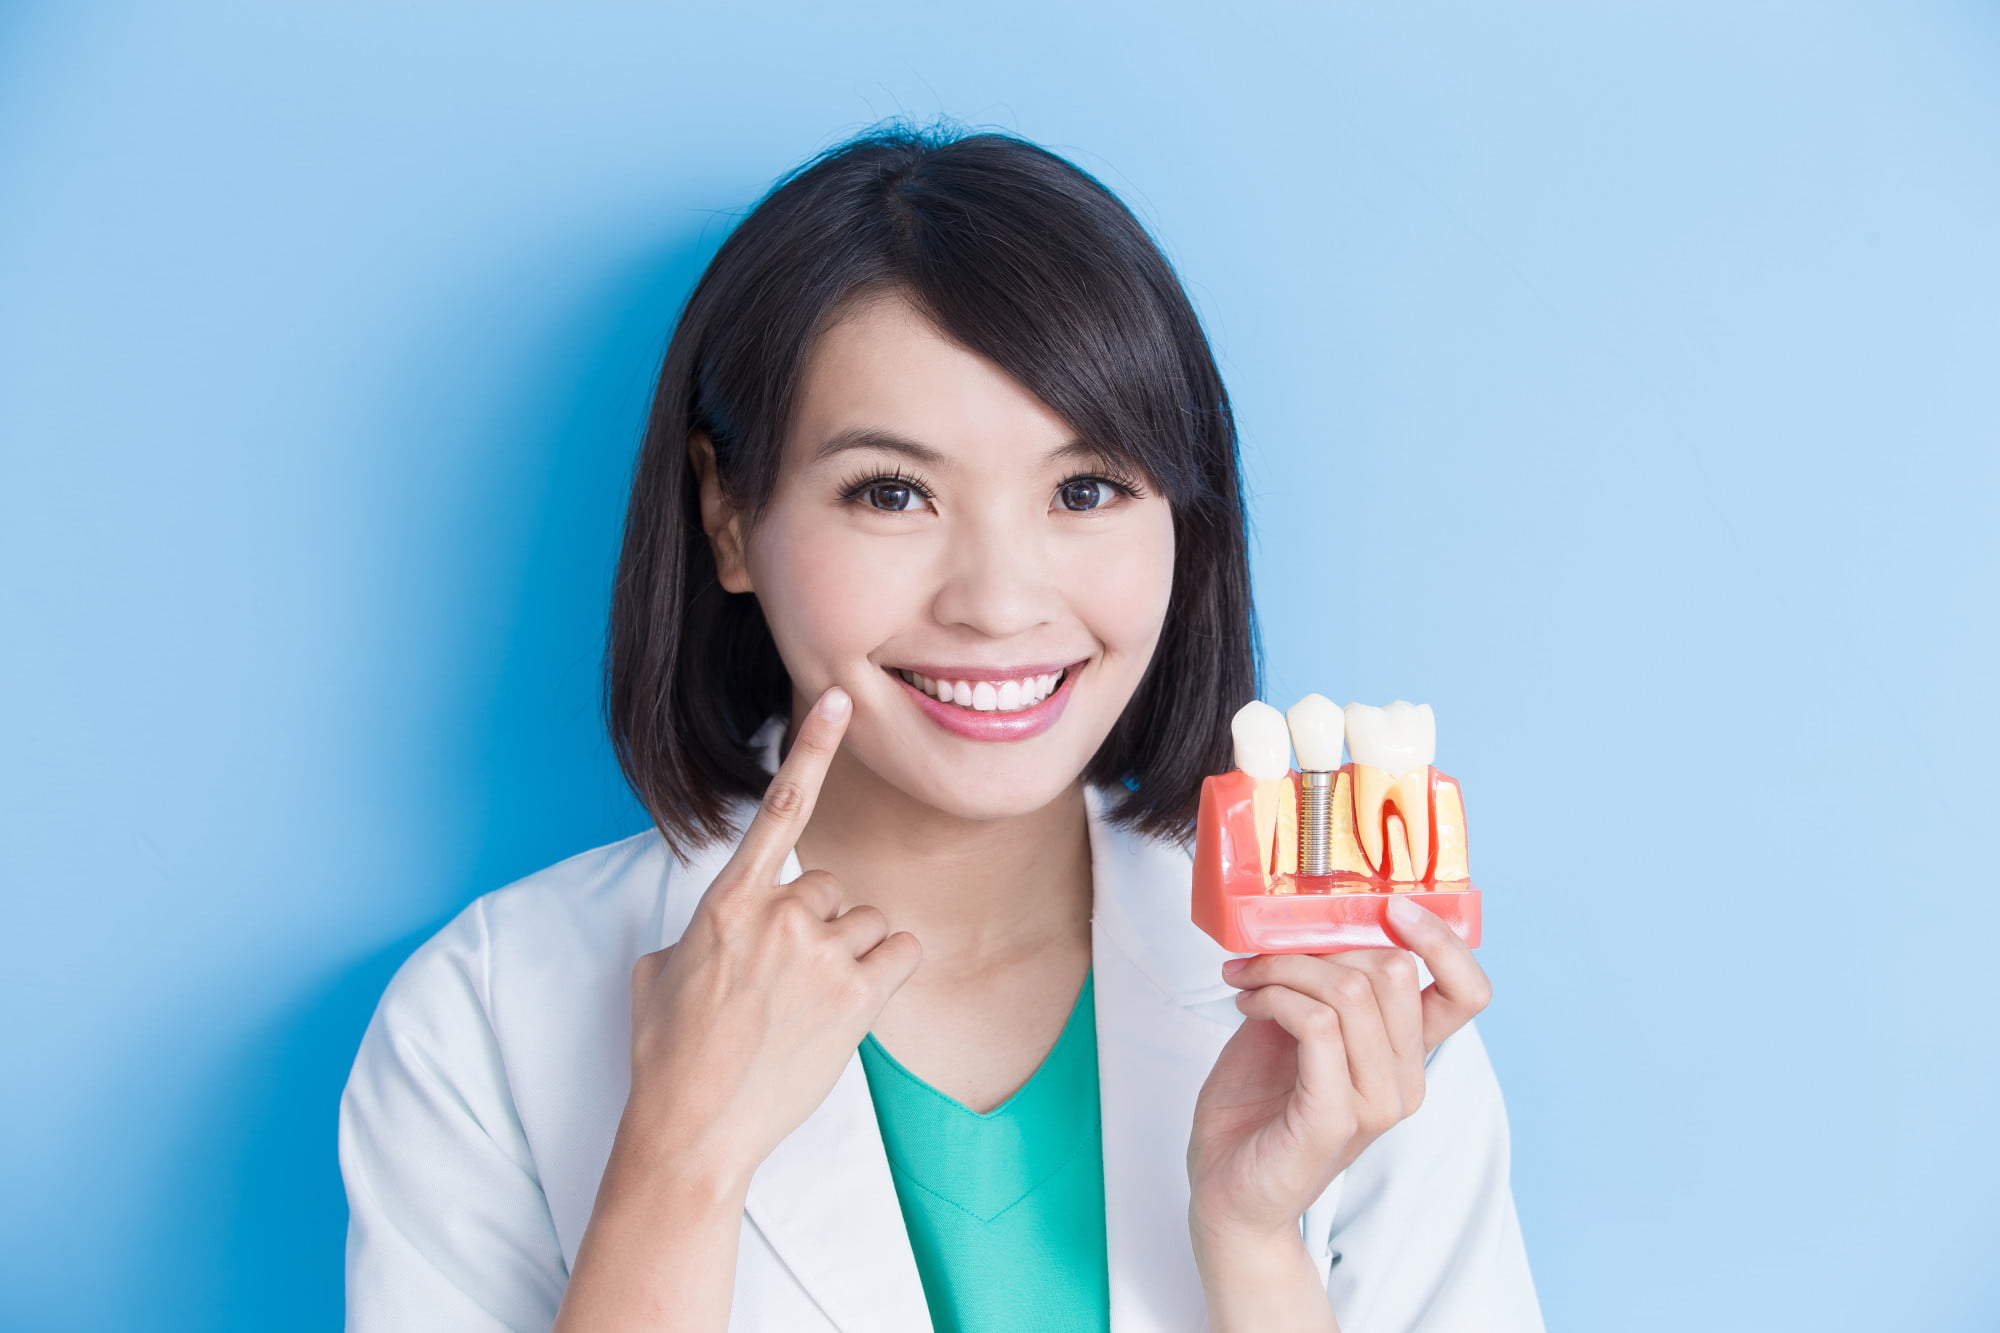 Getting dental implants can be the life change that you've been looking for. Click here for five things to consider before getting dental implants.